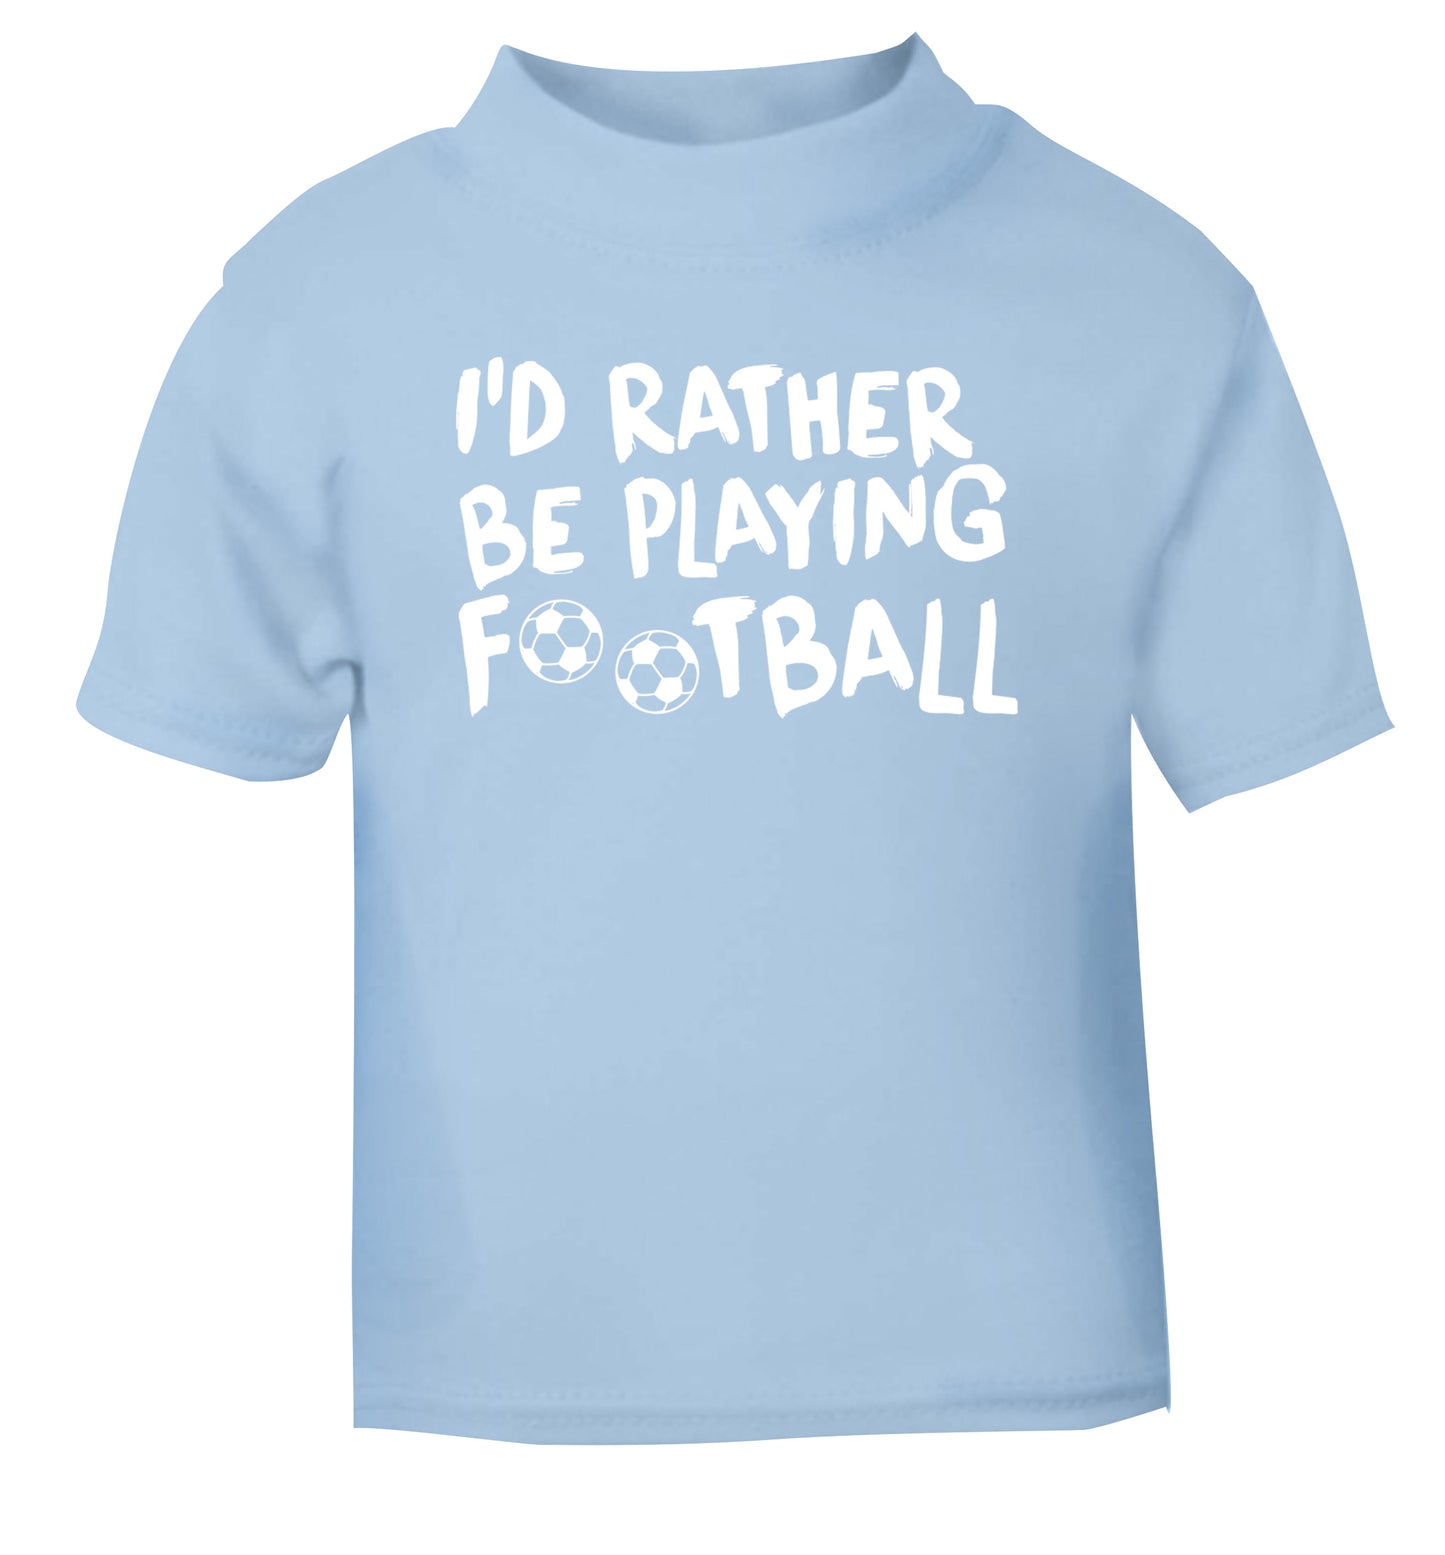 I'd rather be playing football light blue Baby Toddler Tshirt 2 Years